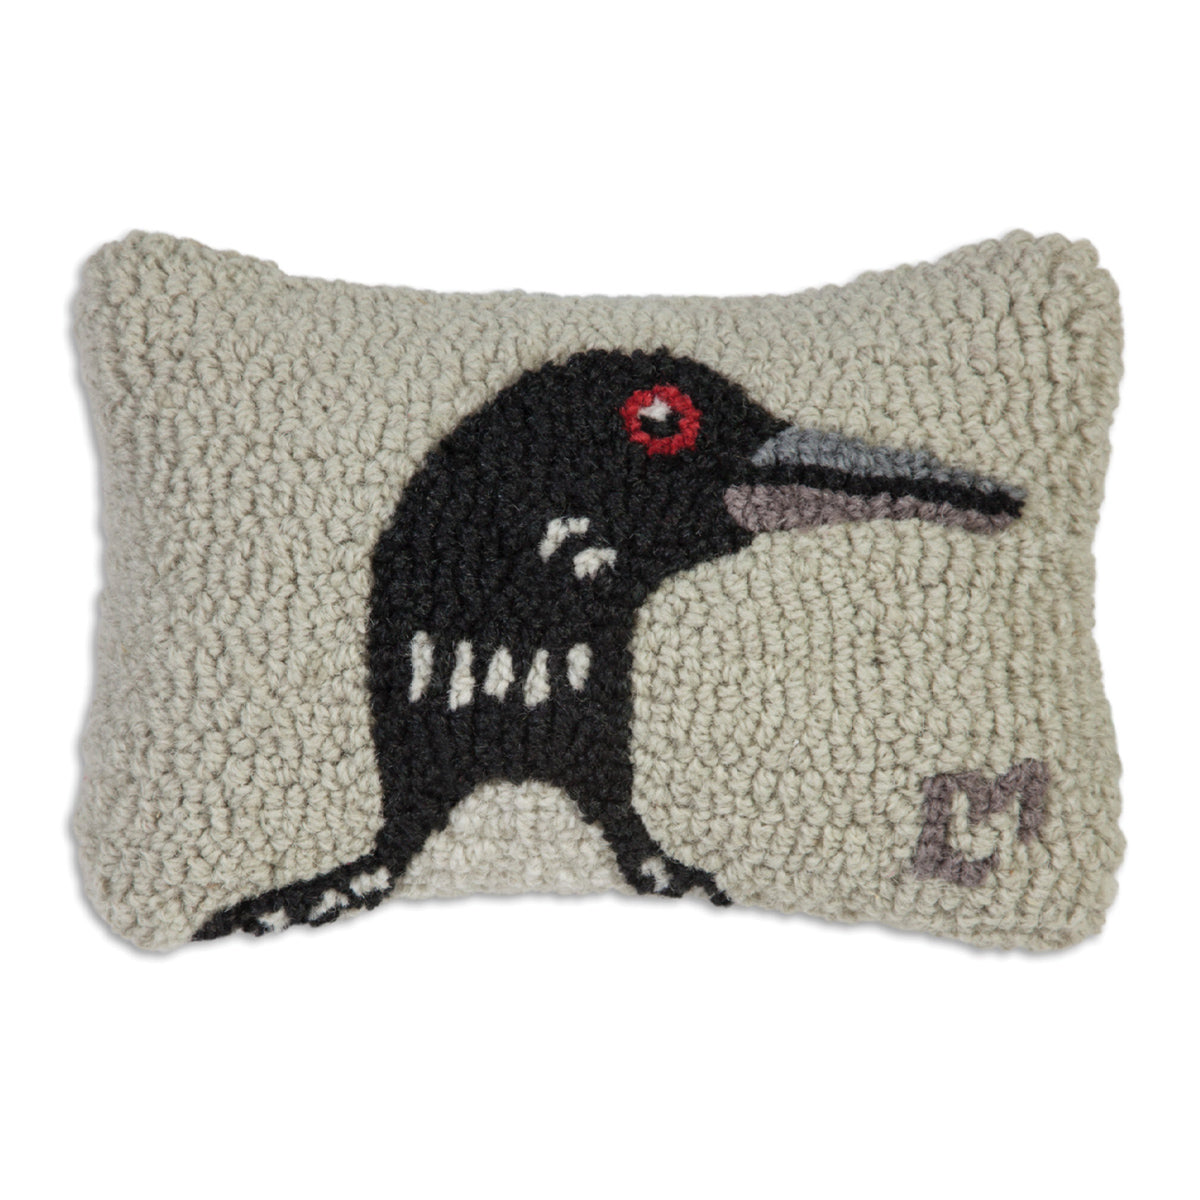 Loon Hooked Wool Pillow 8in x 12in